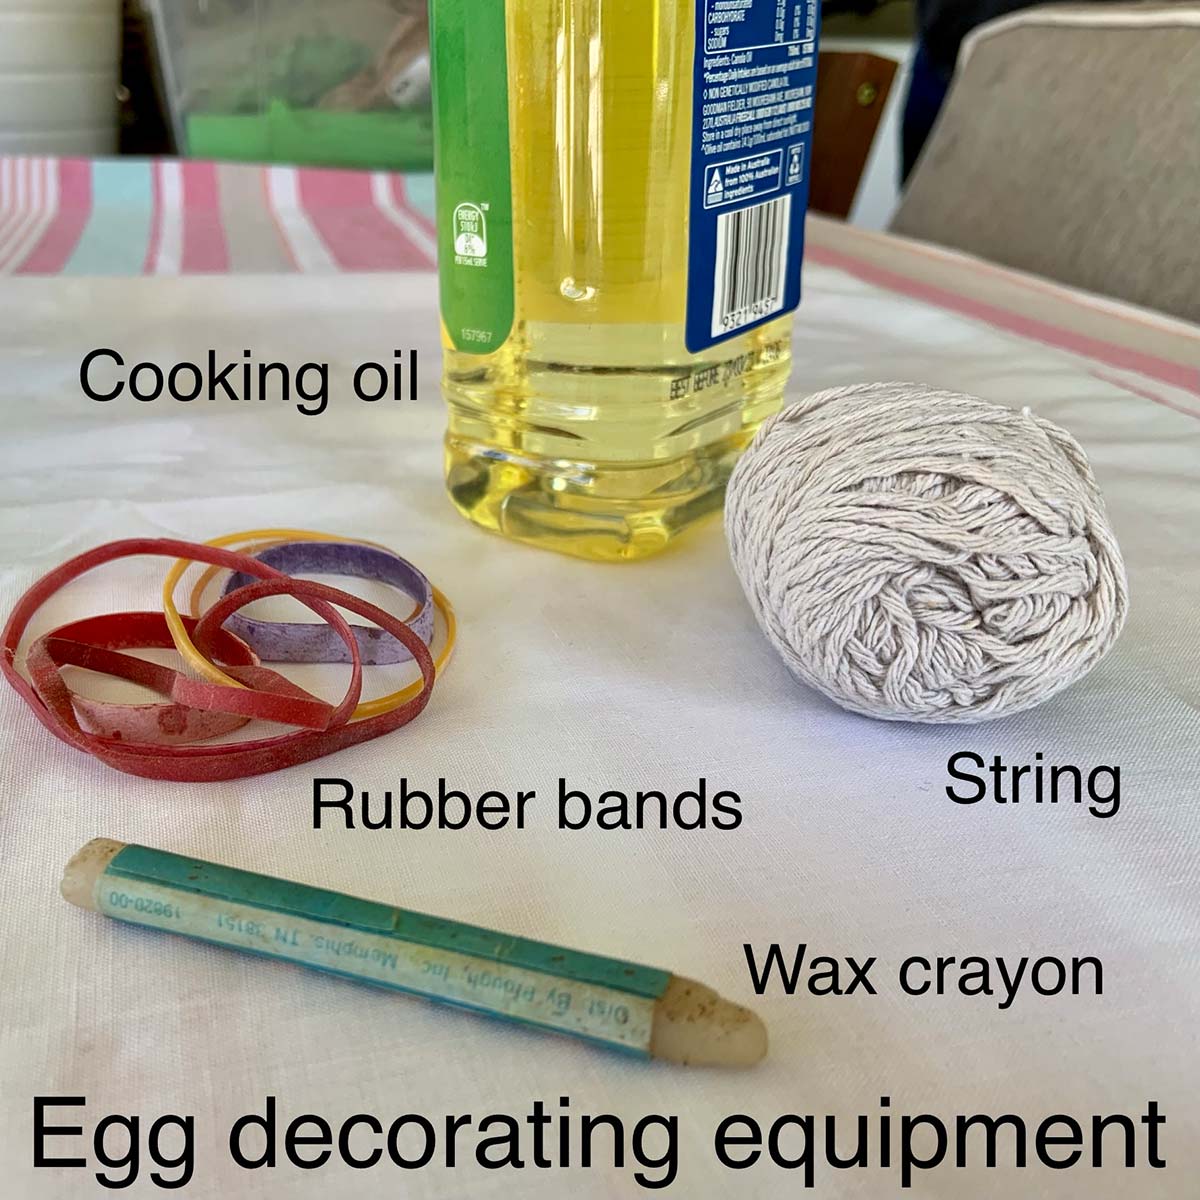 Equipment for decorating dyed eggs: cooking oil, rubber bands, string and wax crayon